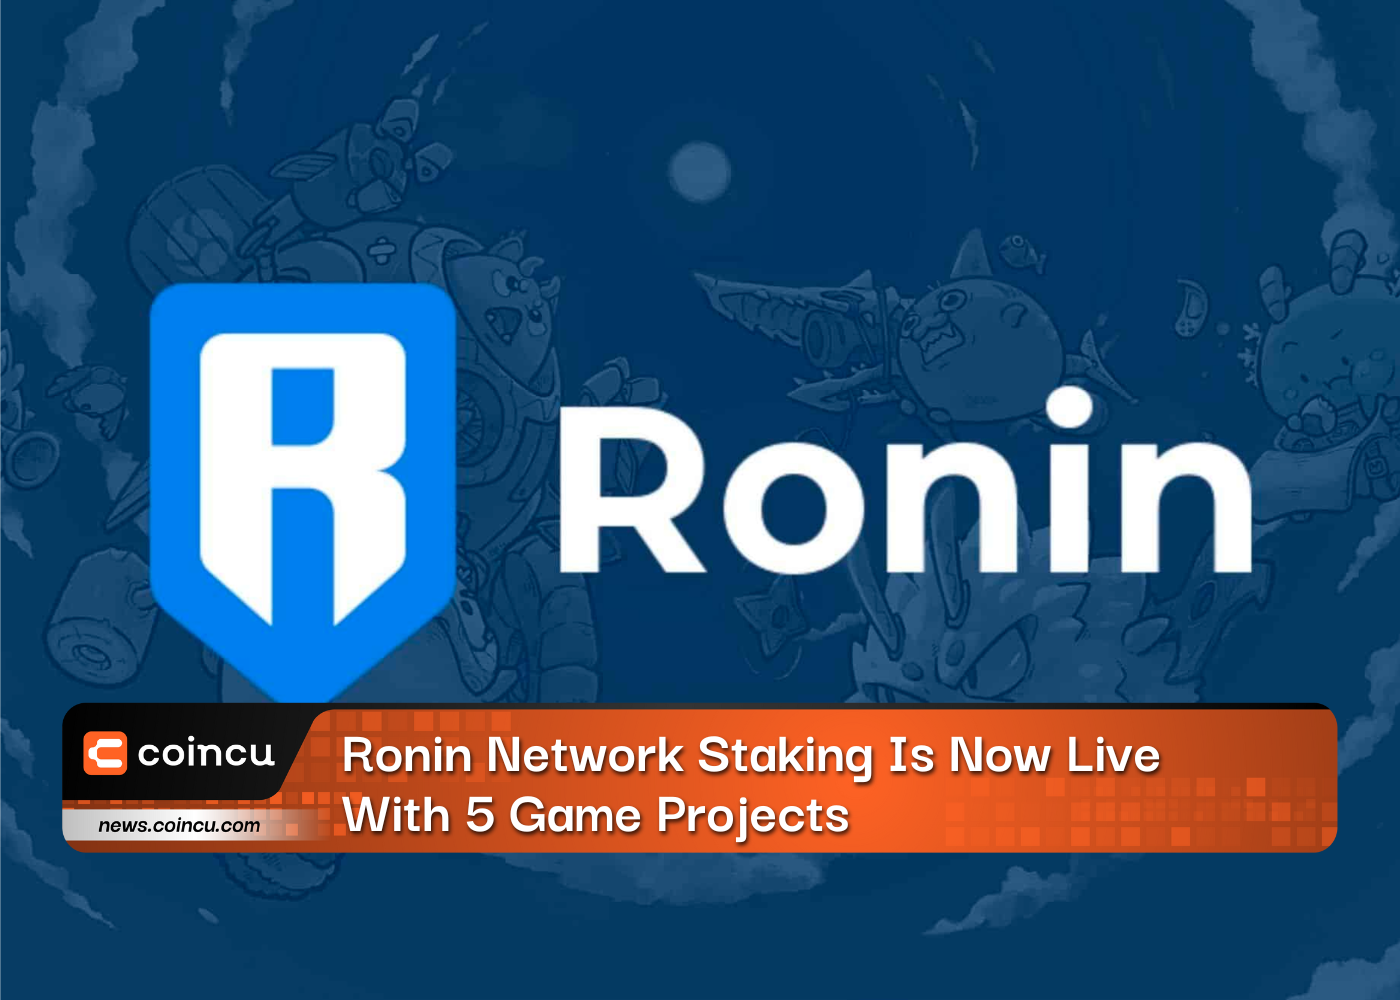 Ronin Network Staking Is Now Live With 5 Game Projects